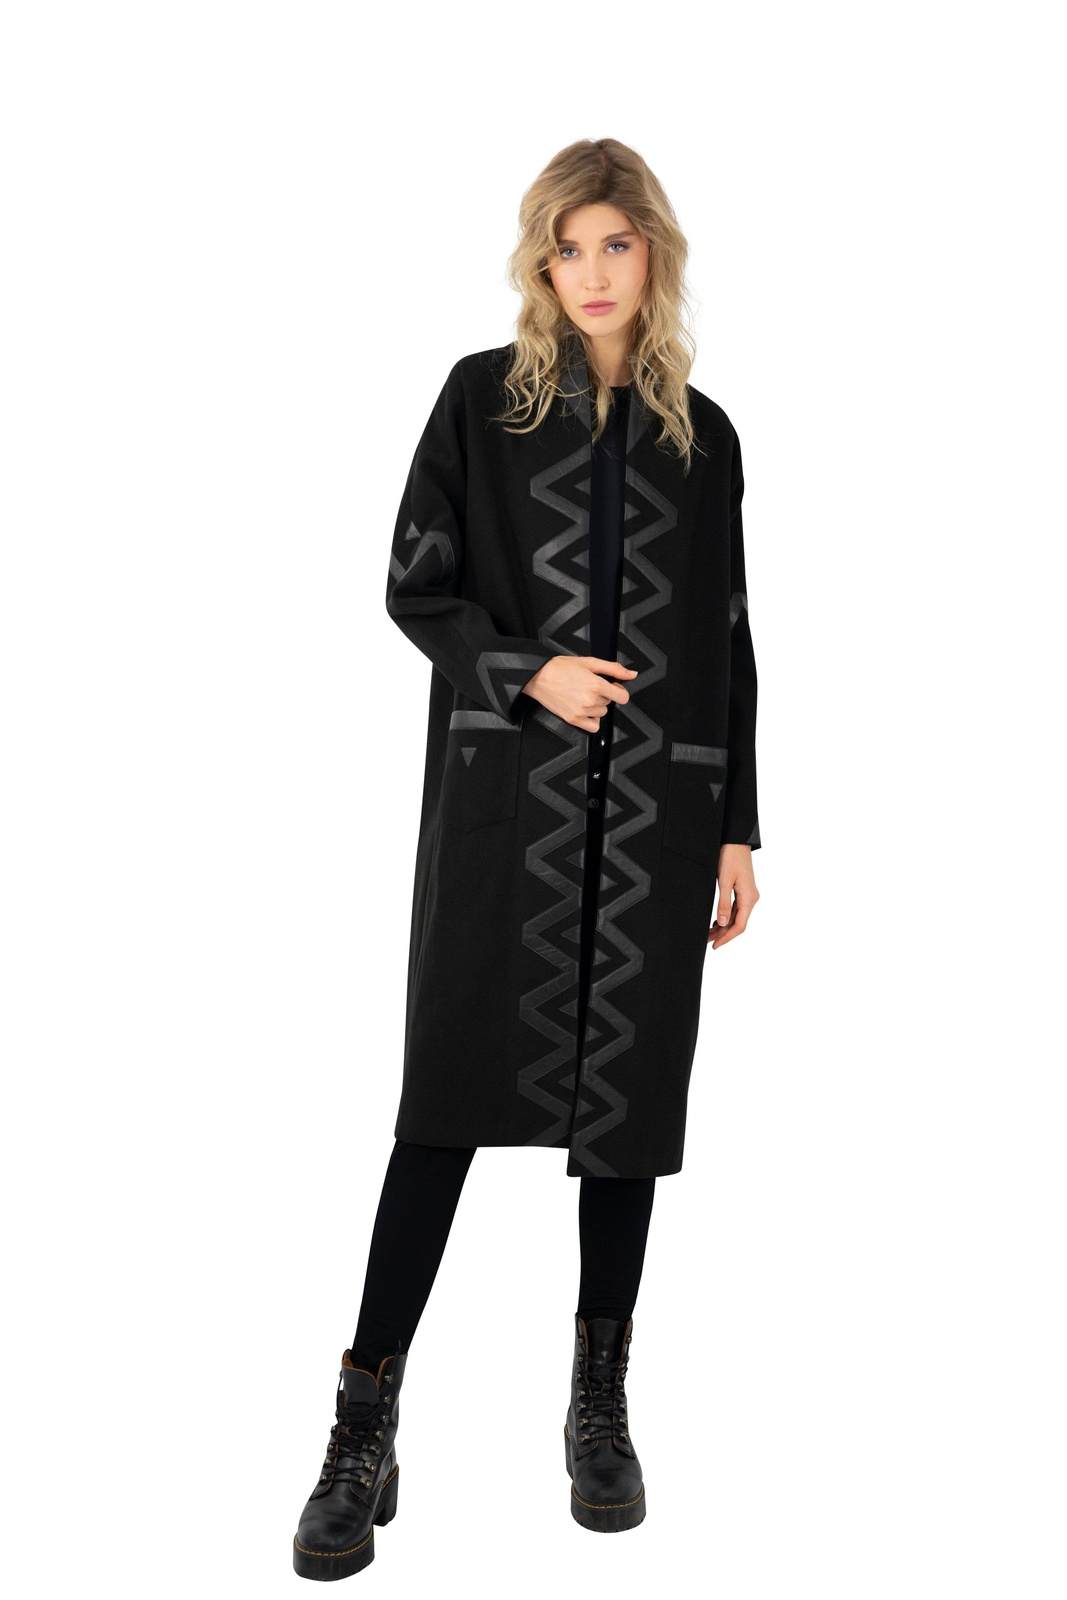 Love Khaos wool and leather coat